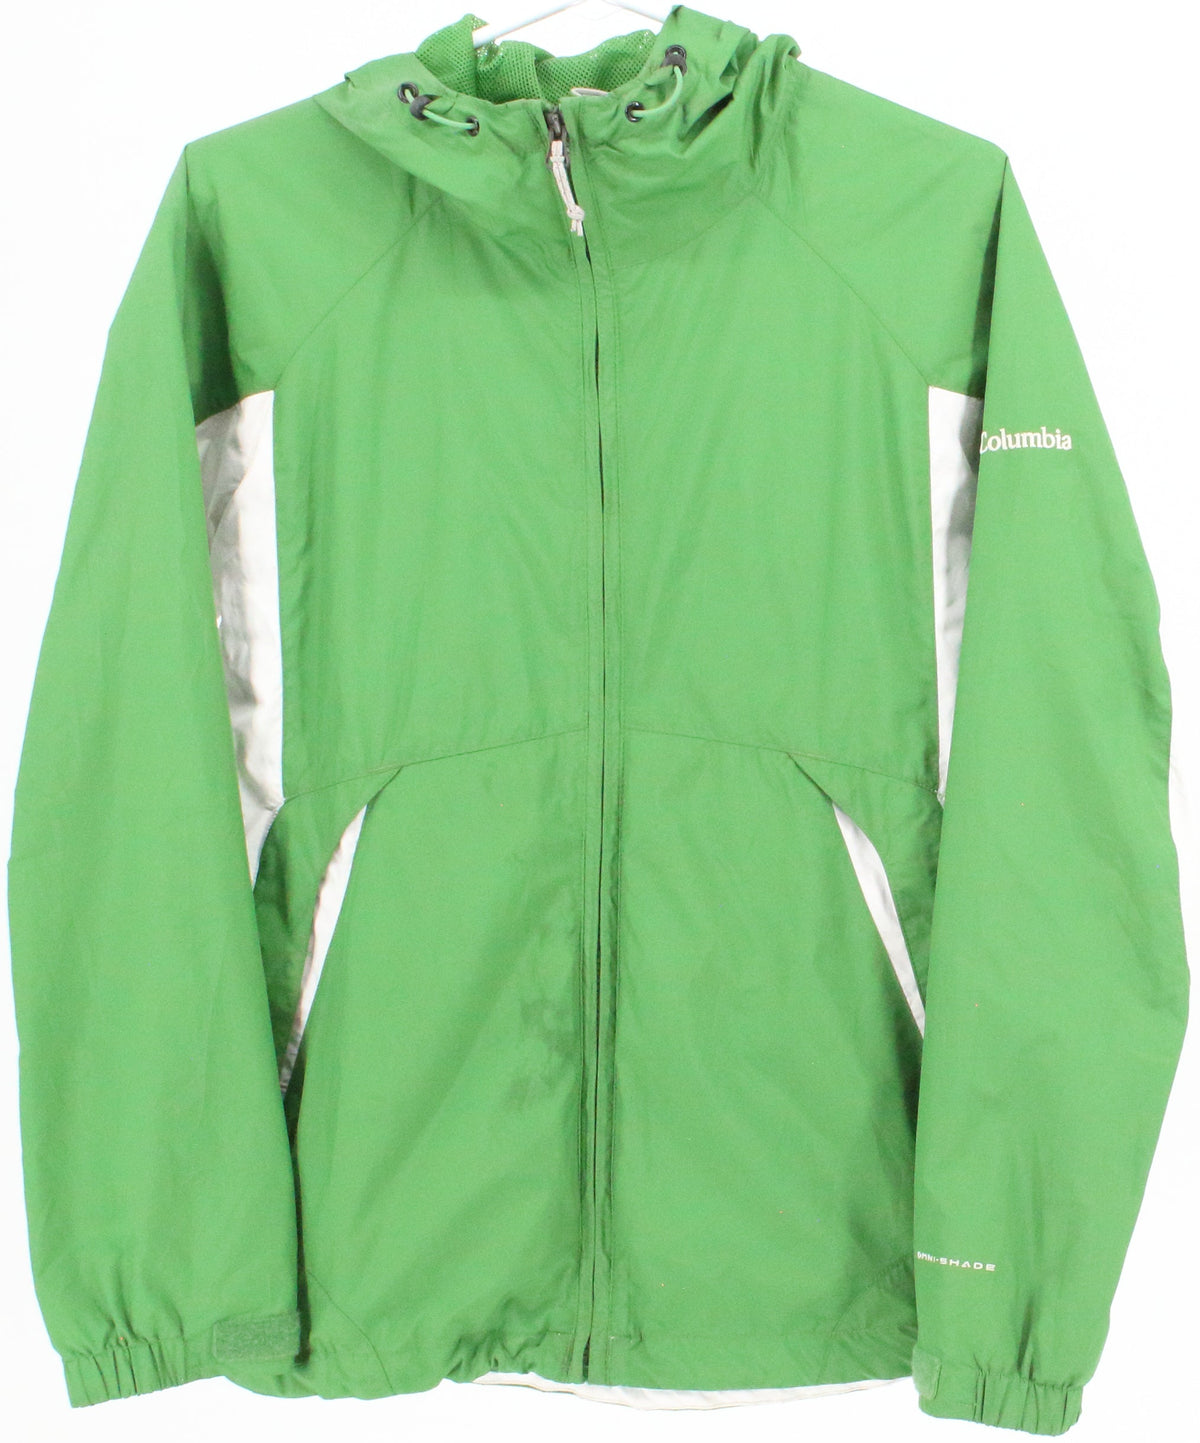 Columbia Omni-Shade Green and White Hooded Women's Jacket